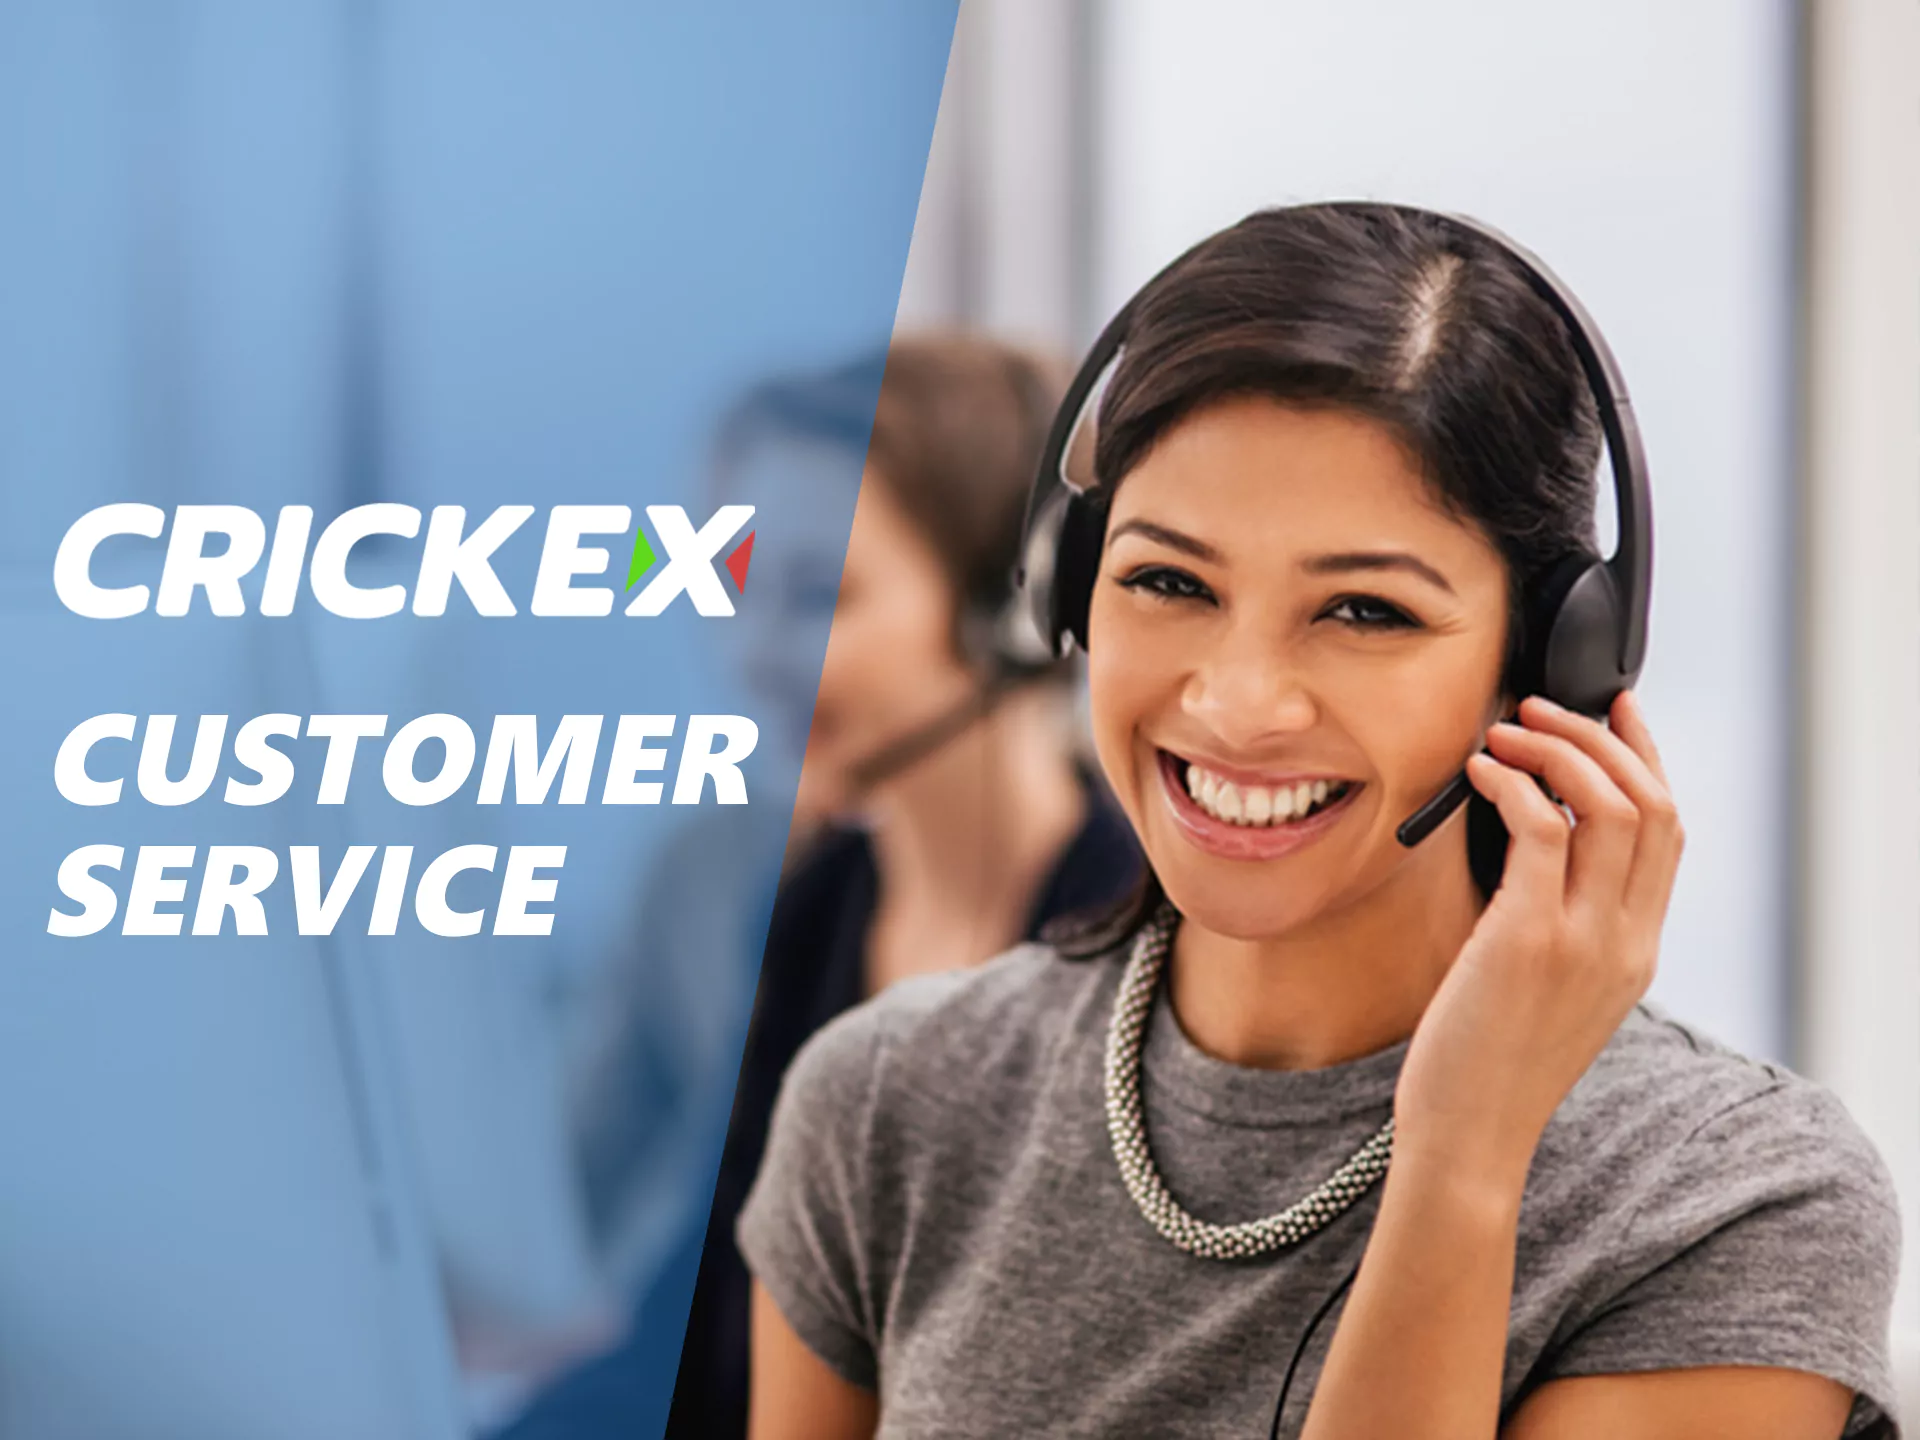 Ask your questions to customer service.